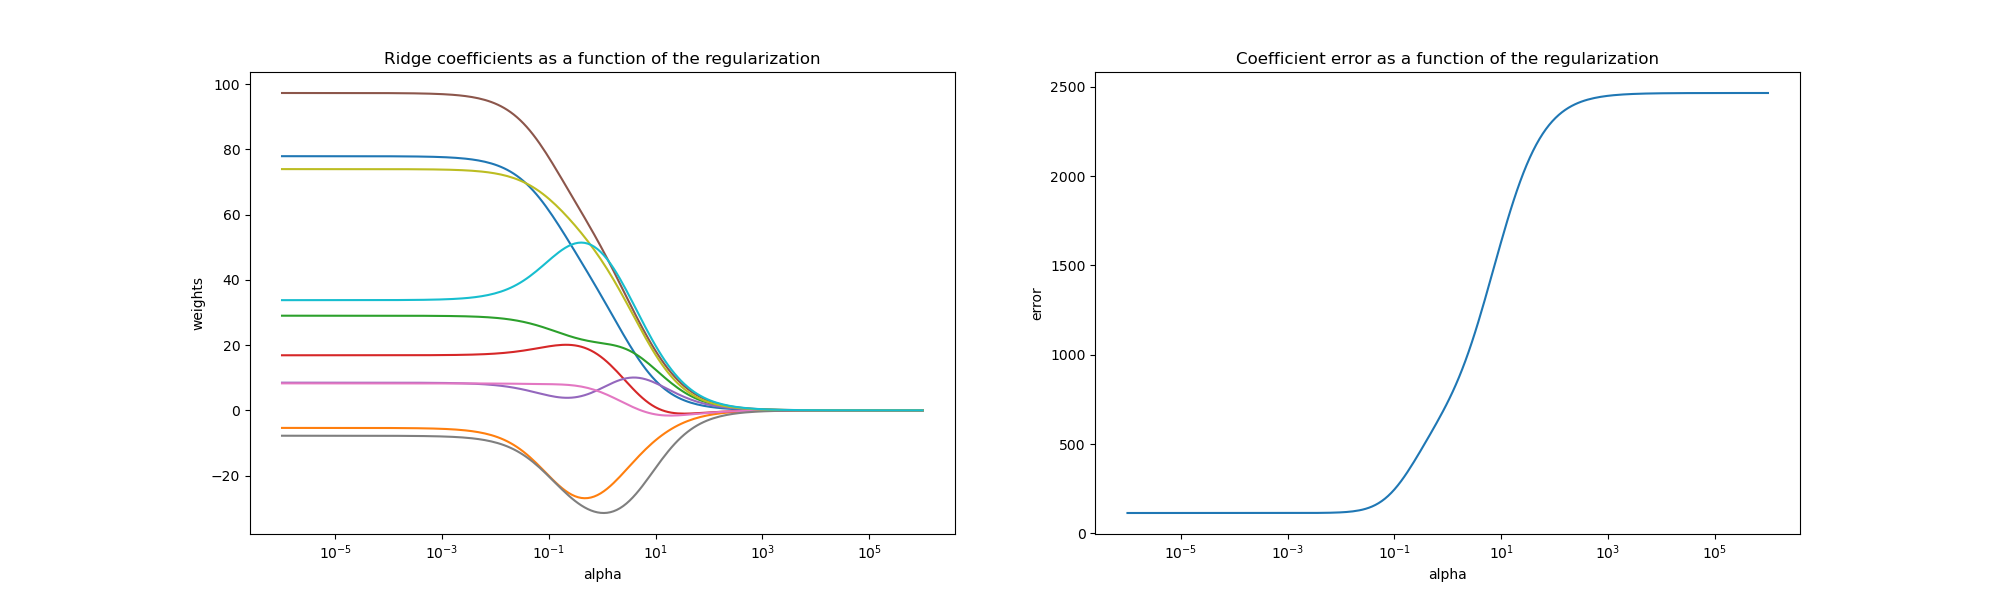 Ridge coefficients as a function of the regularization, Coefficient error as a function of the regularization